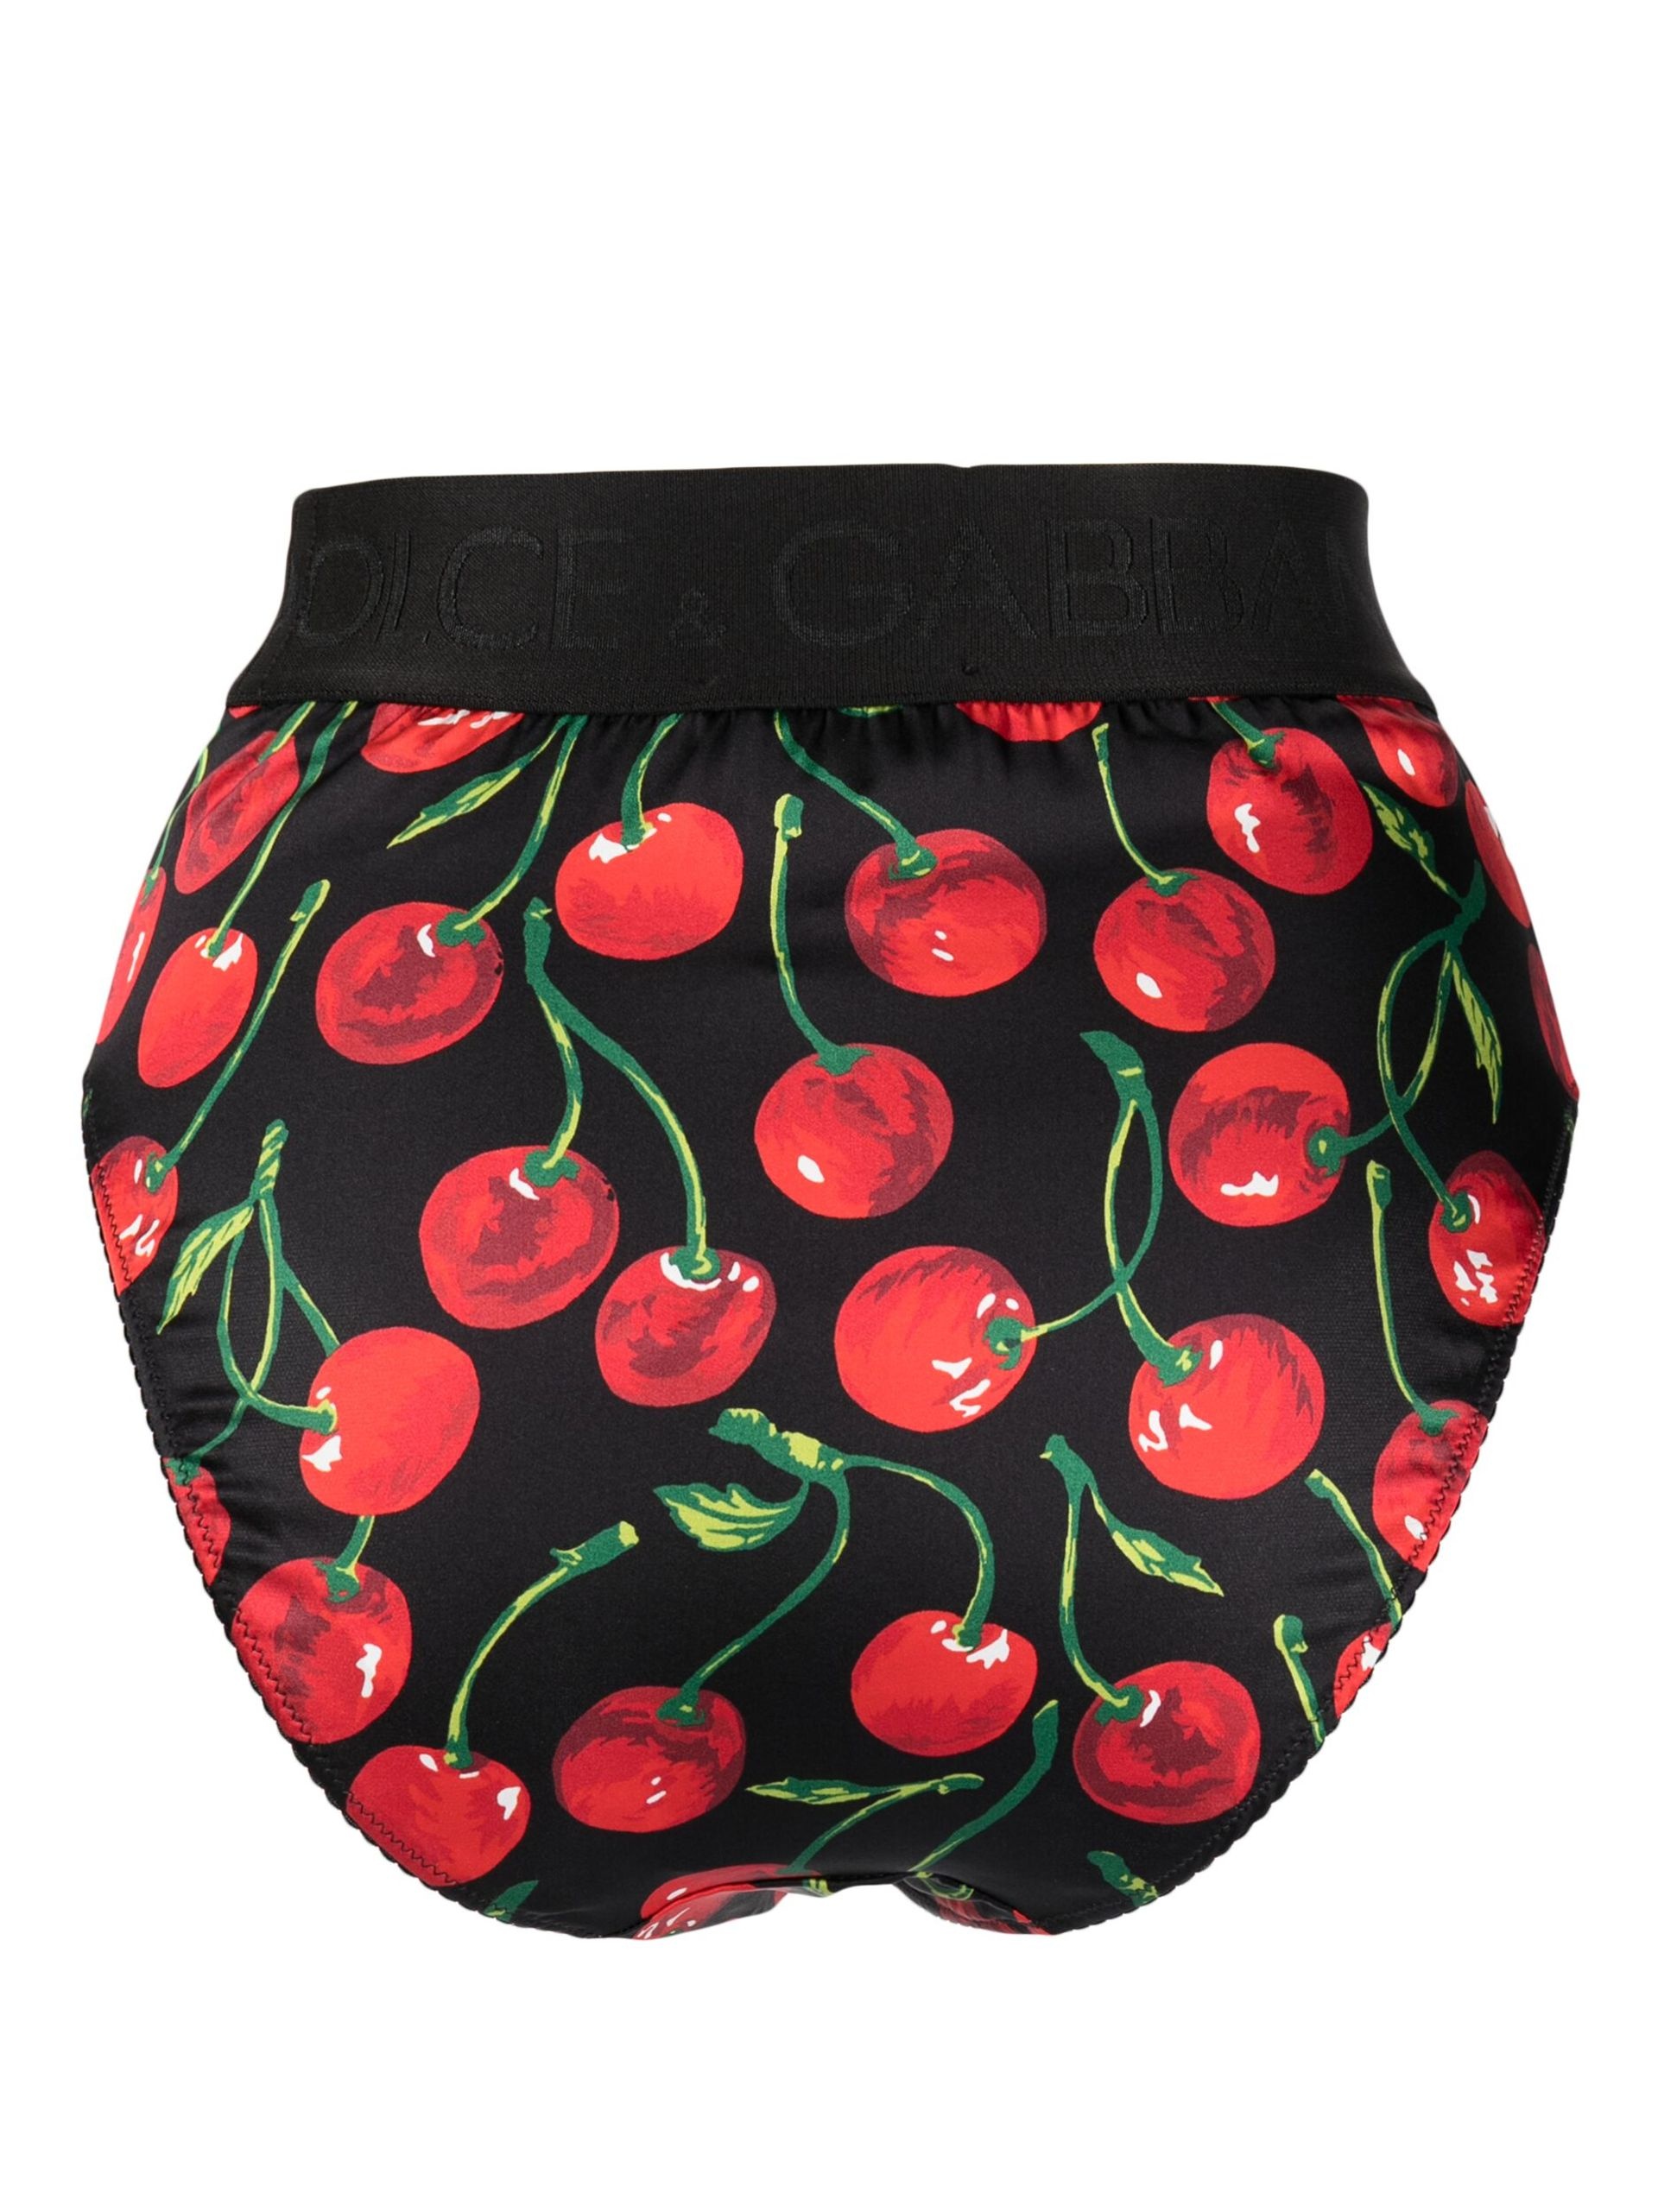 Black And Red Cherry Print Briefs - 2